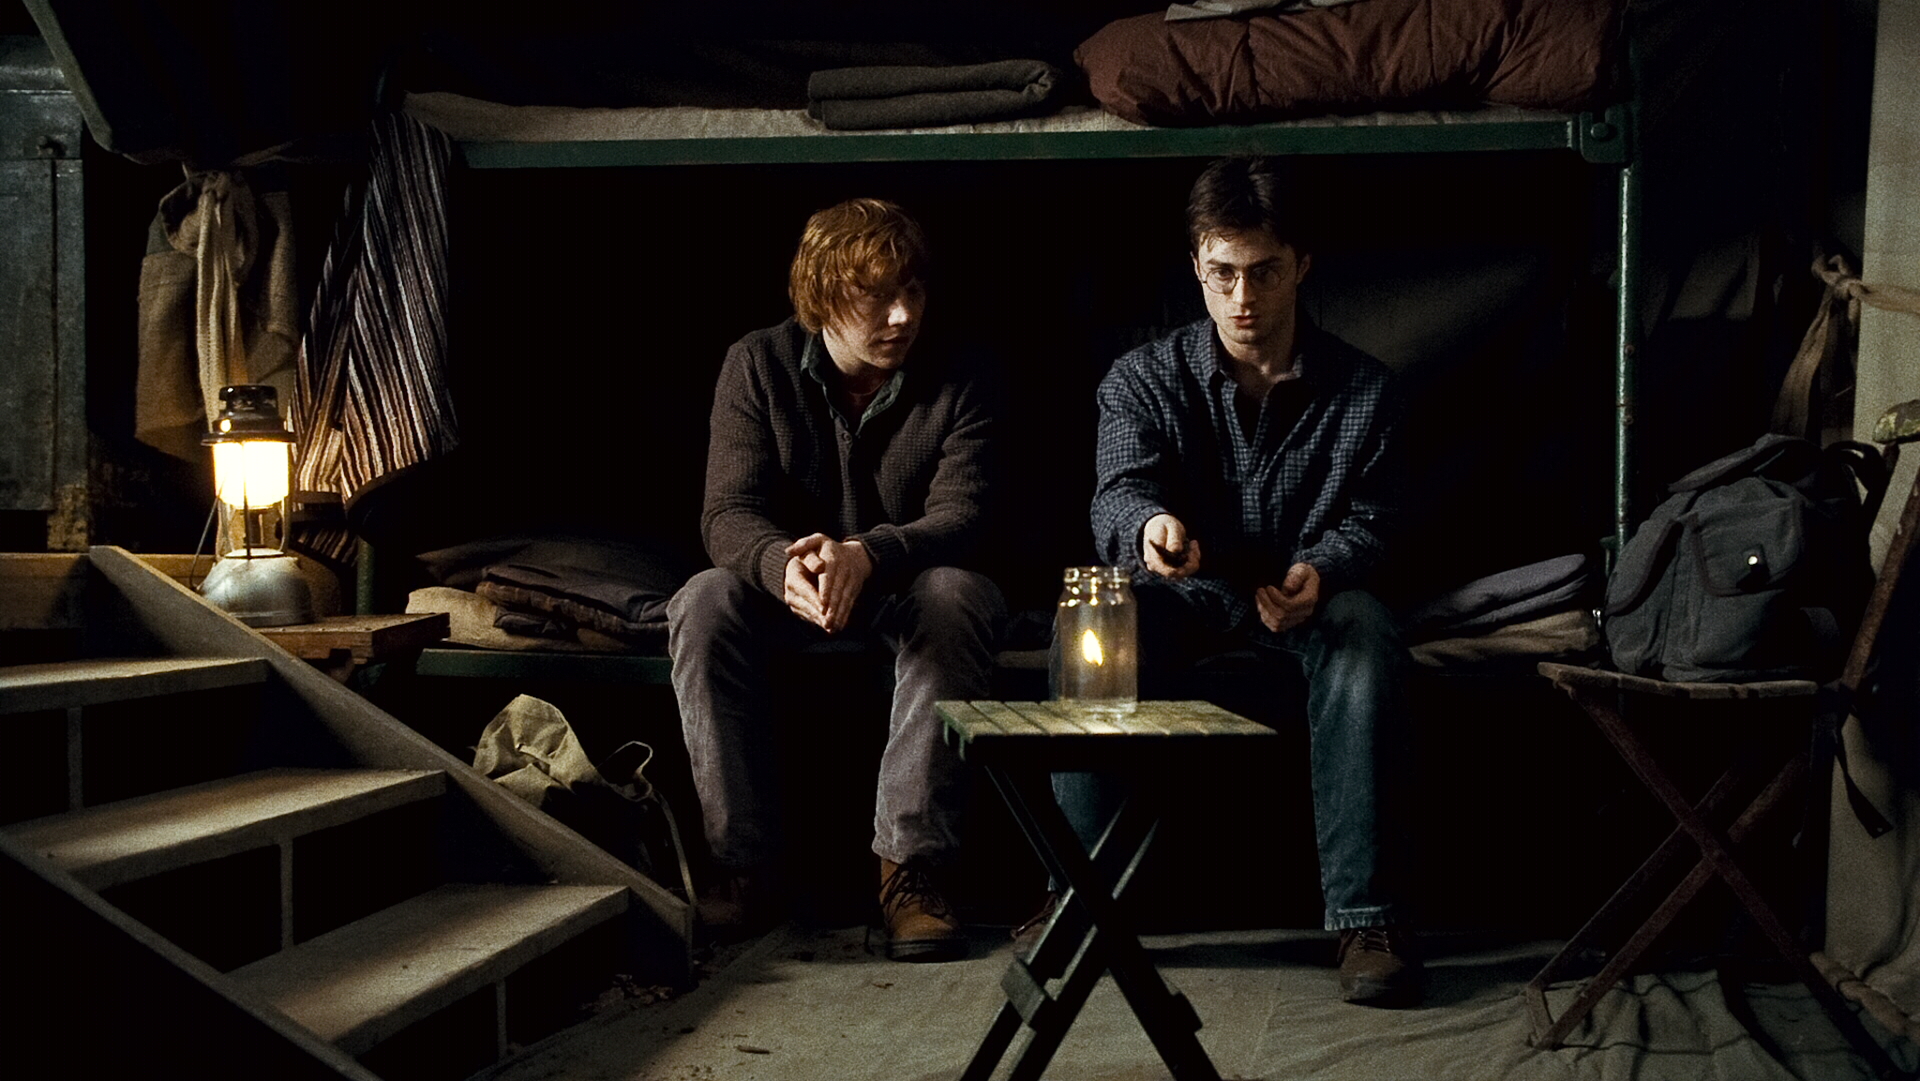 Movie Harry Potter and the Deathly Hallows: Part 1 HD Wallpaper | Background Image